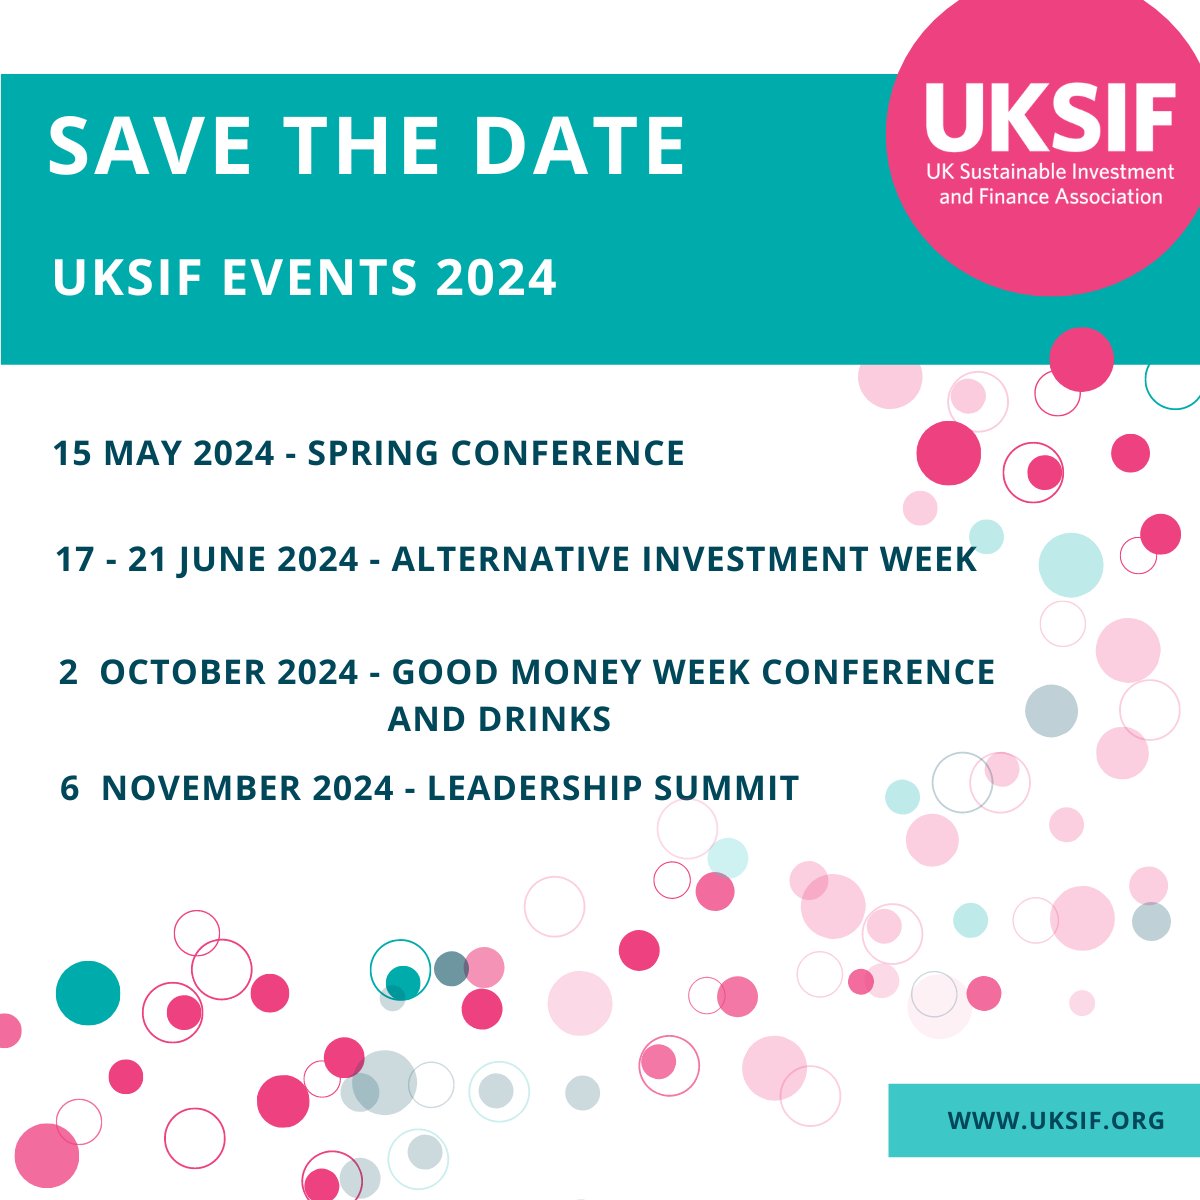 Check out the exciting line-up of UKSIF events this year. Be sure to save the date and keep checking our social media channels for announcements about registrations. For more details: uksif.org/events/ #Events #SaveTheDate